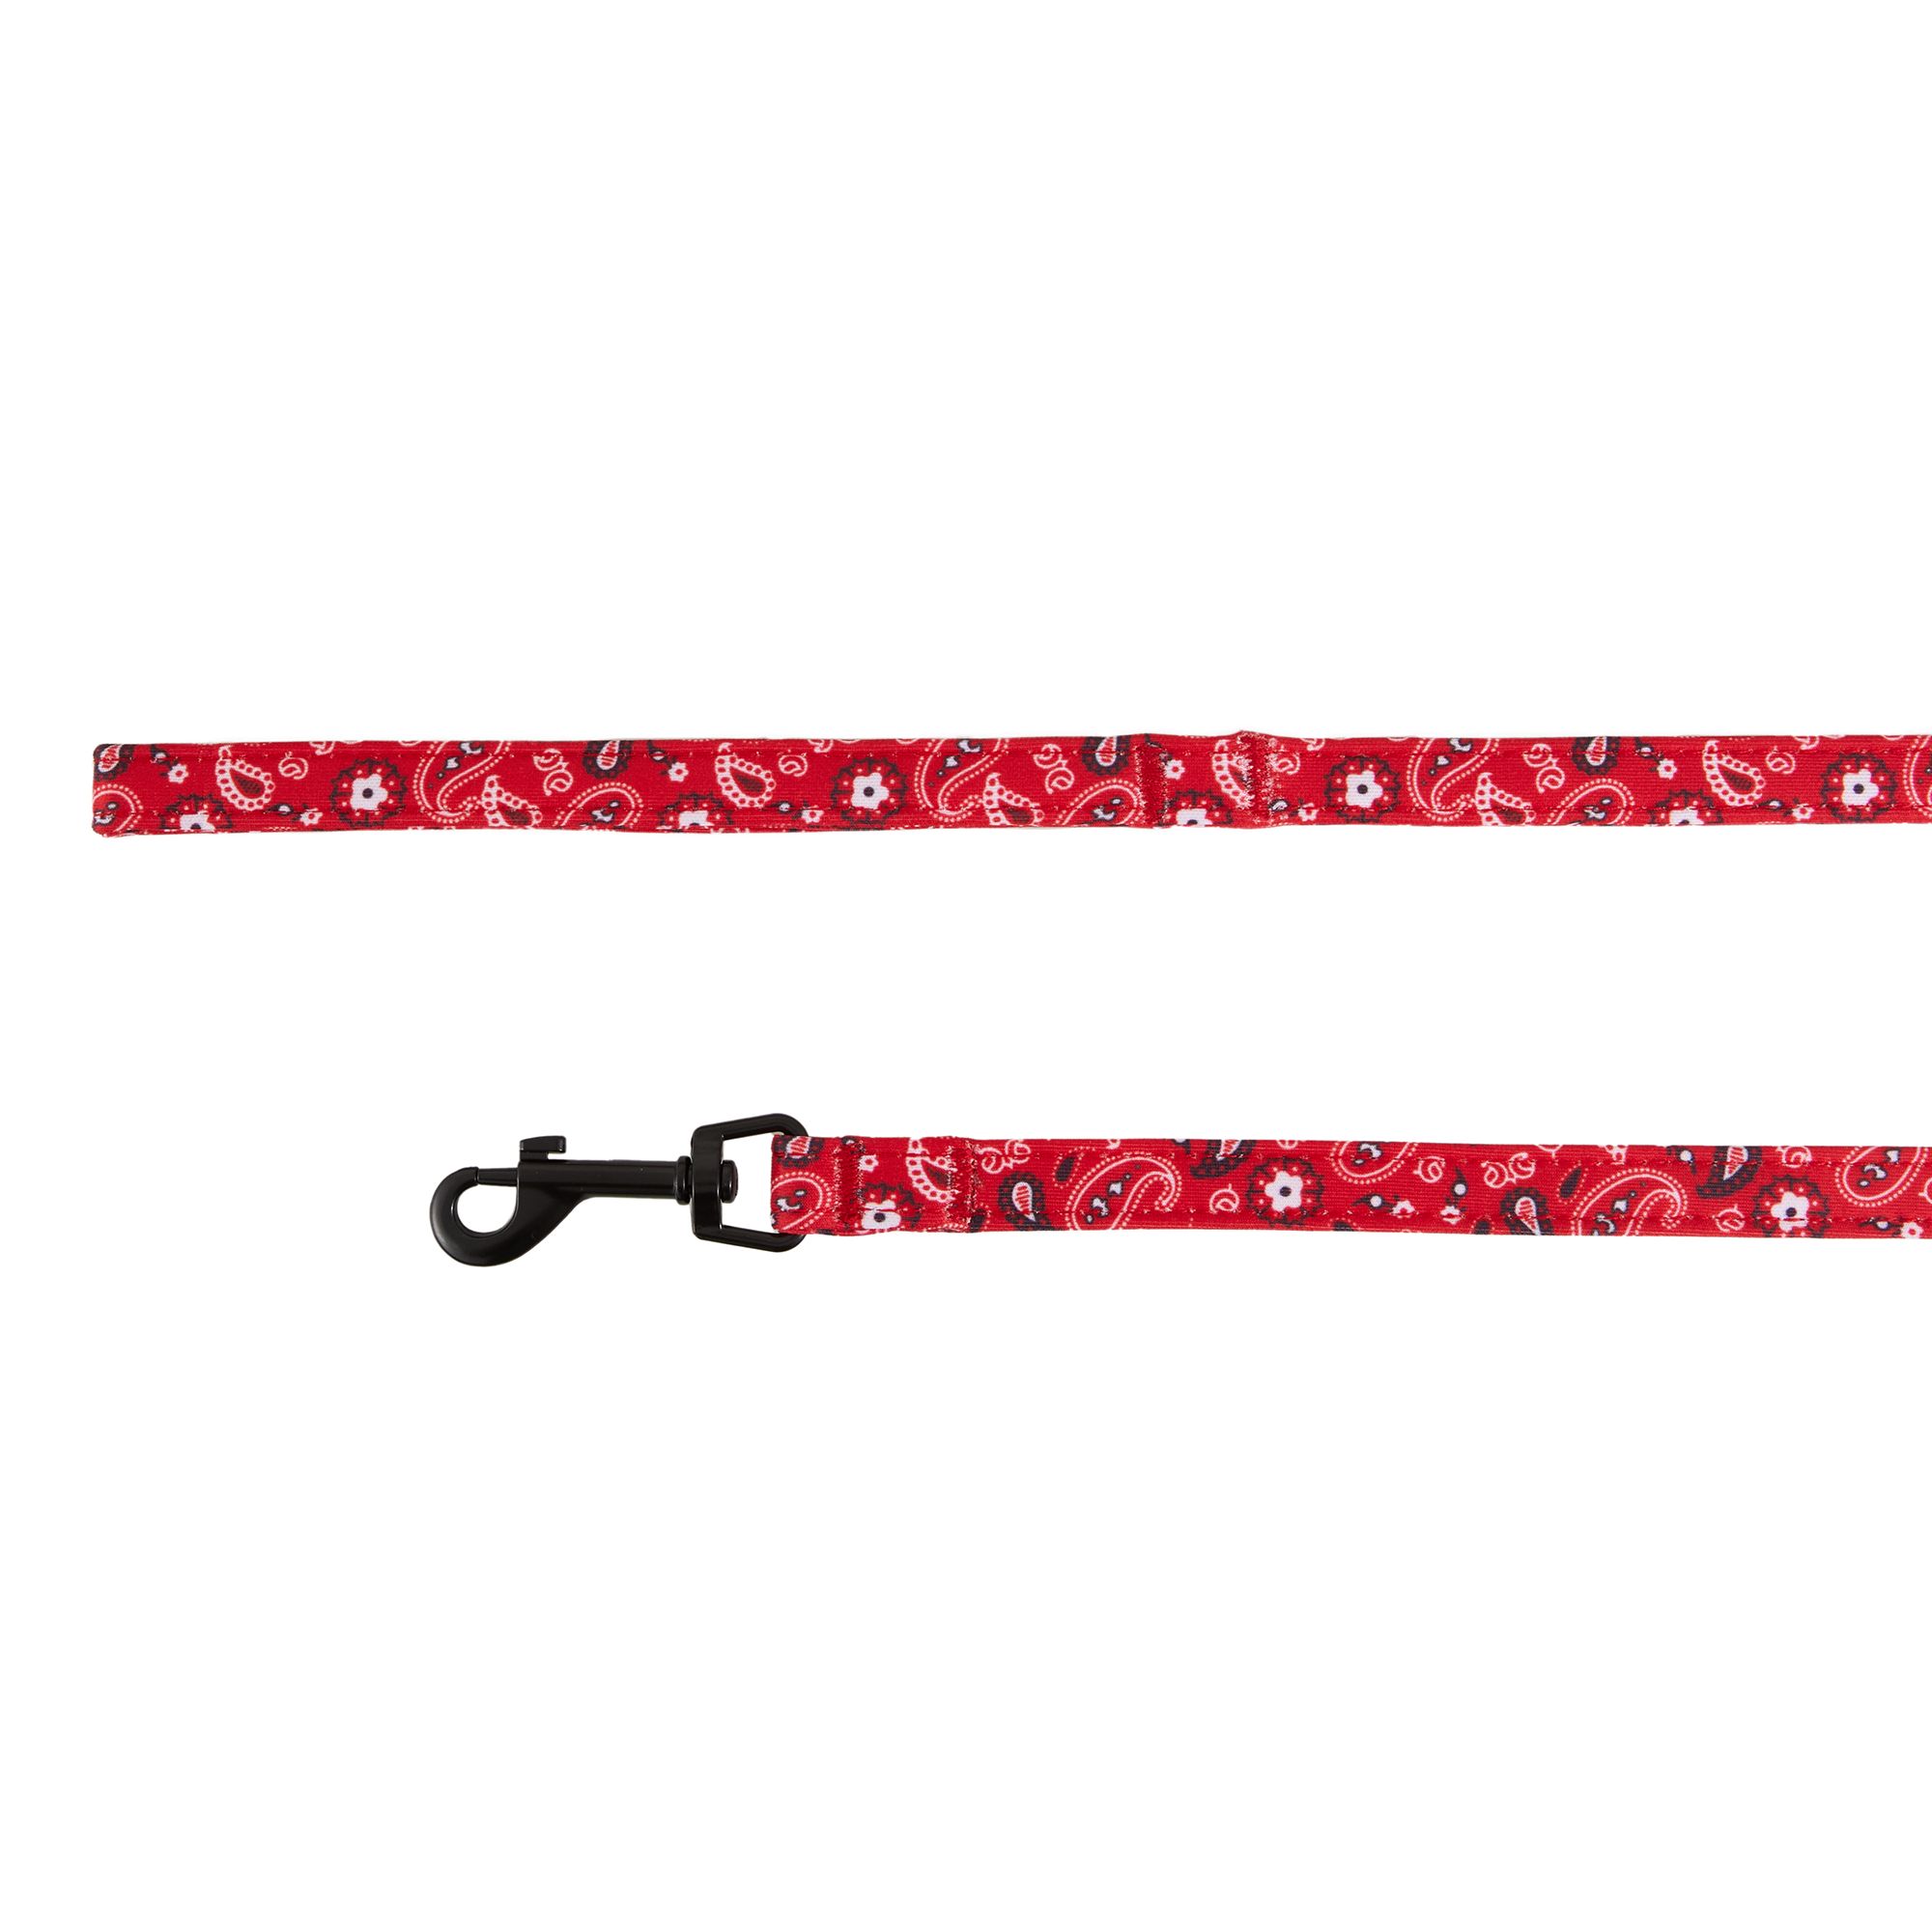 Top Paw&reg; Red Bandana Dog Leash: 6-ft long, 5/8-in wide